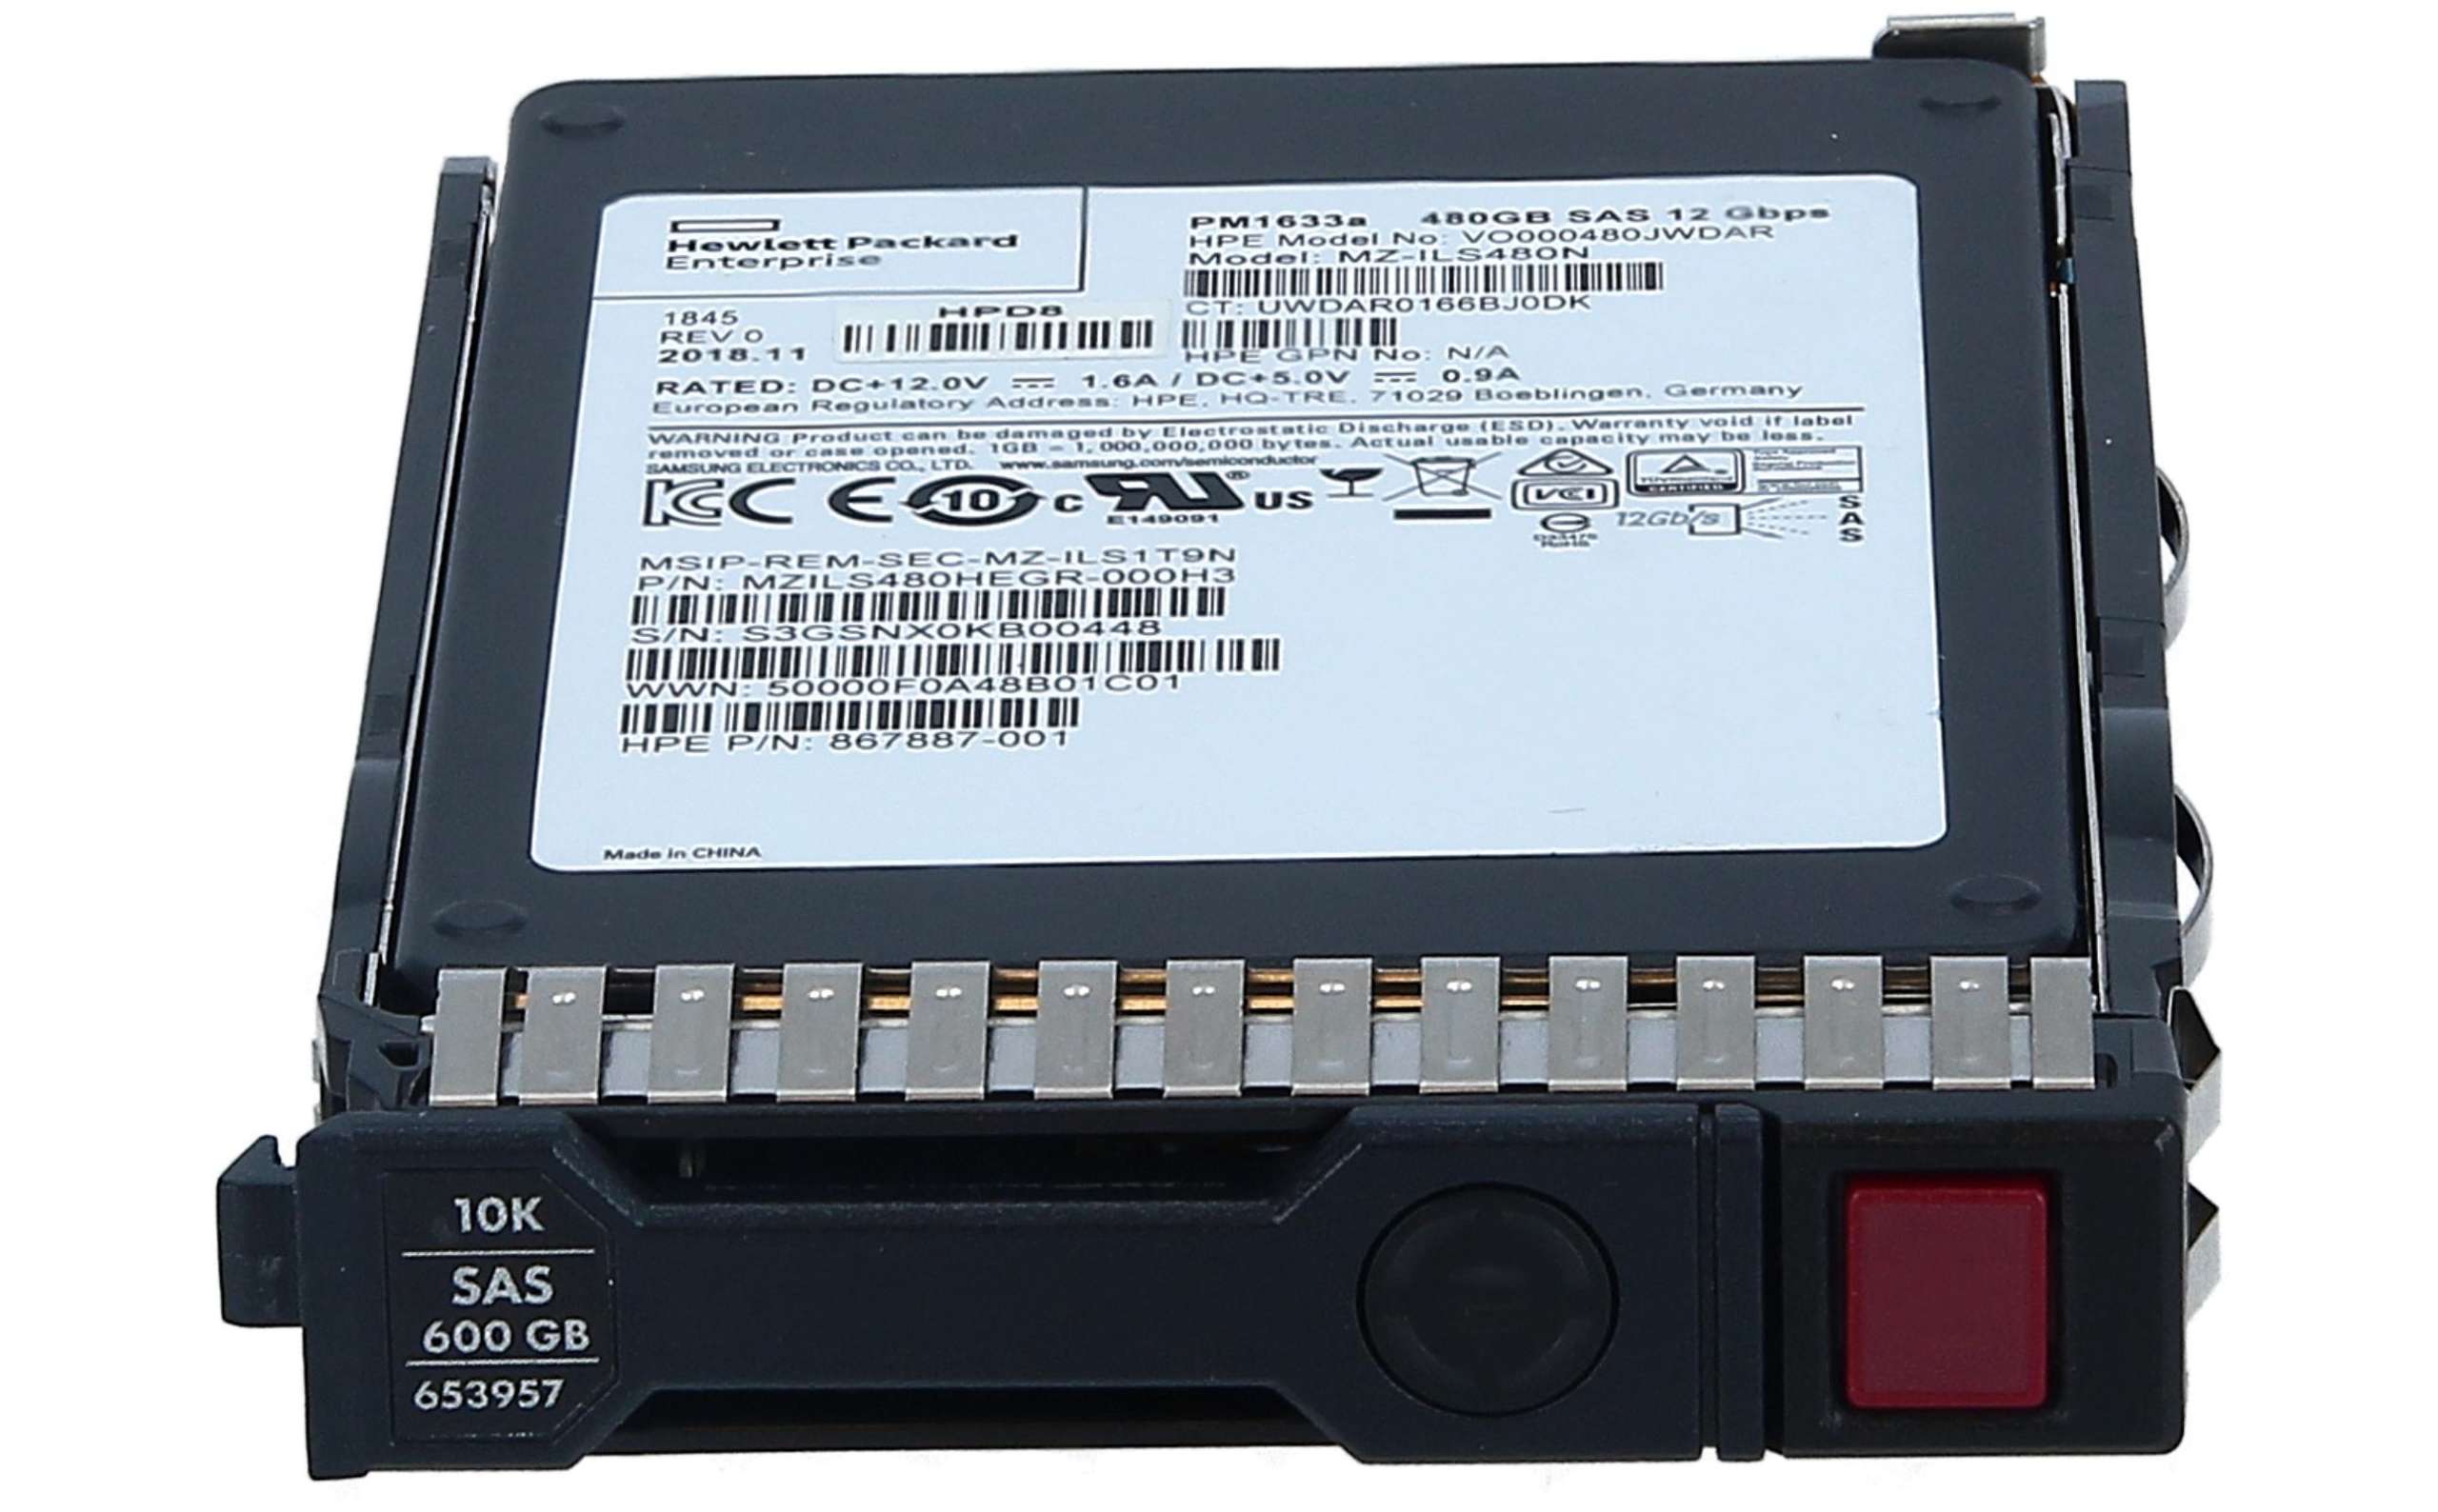 Samsung - - Pm1633a 480gb Read Intensive 12gbps 2.5" SSD